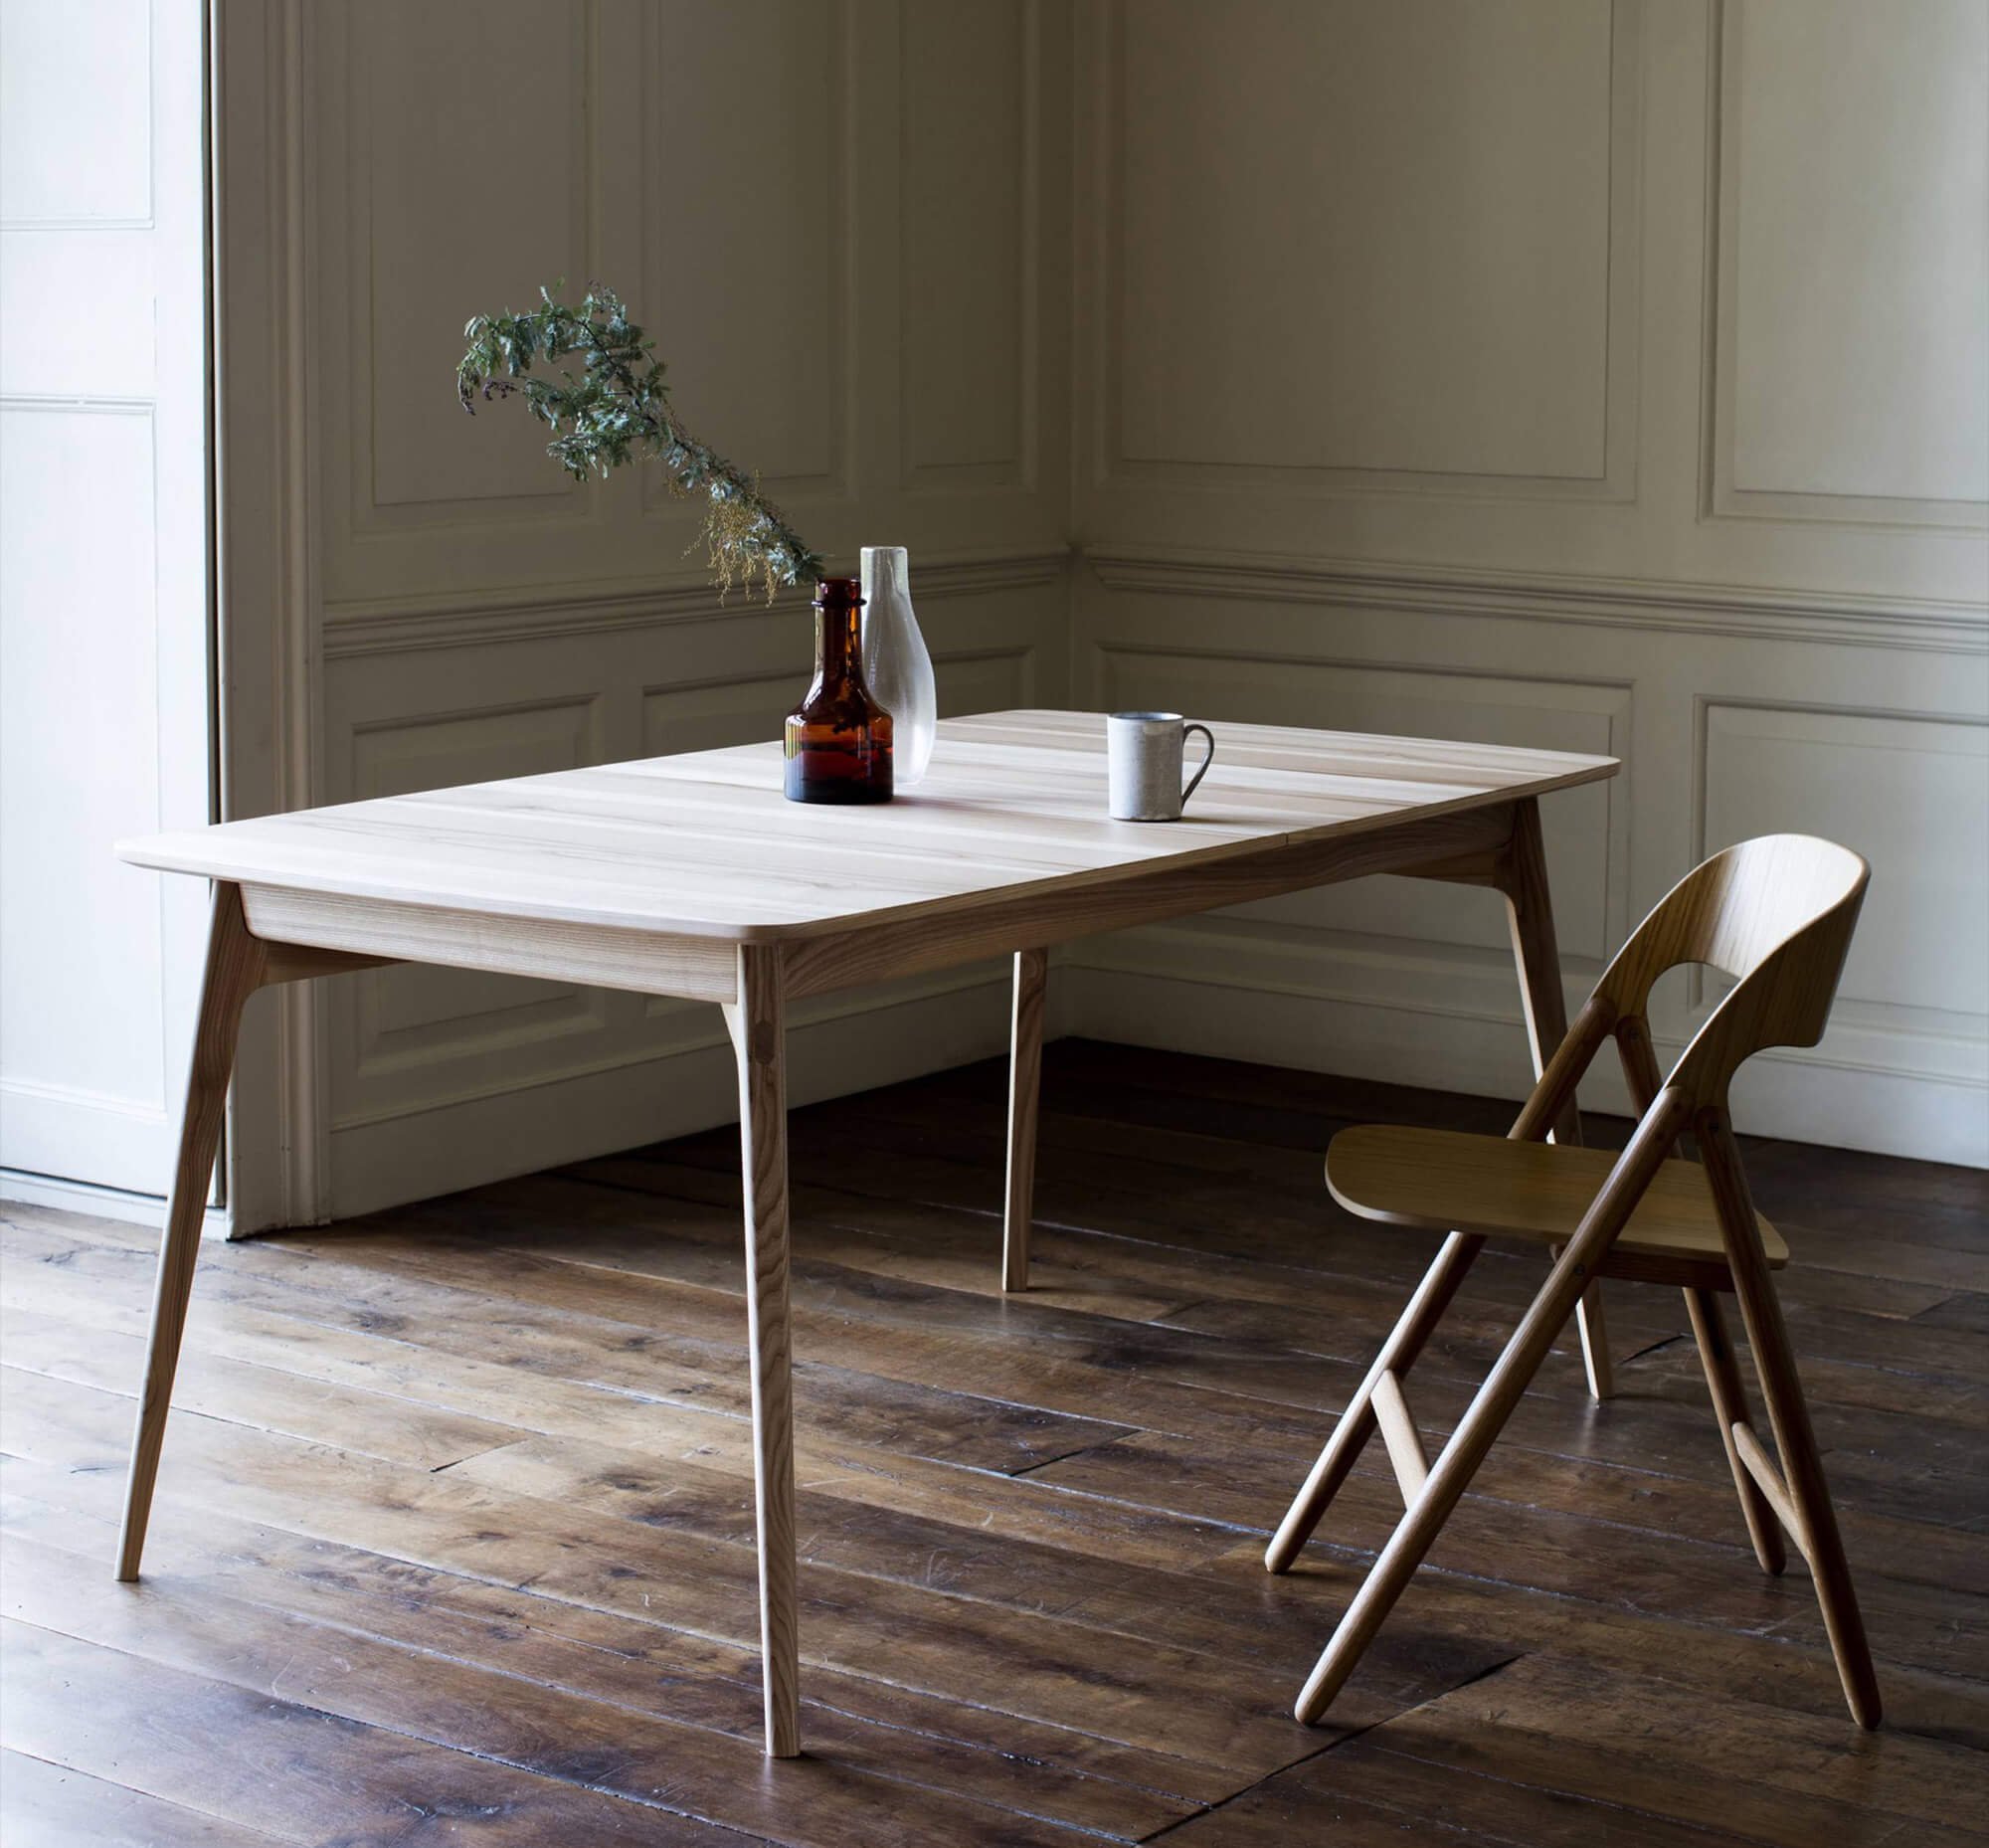 case-dulwich-dining-table.jpg